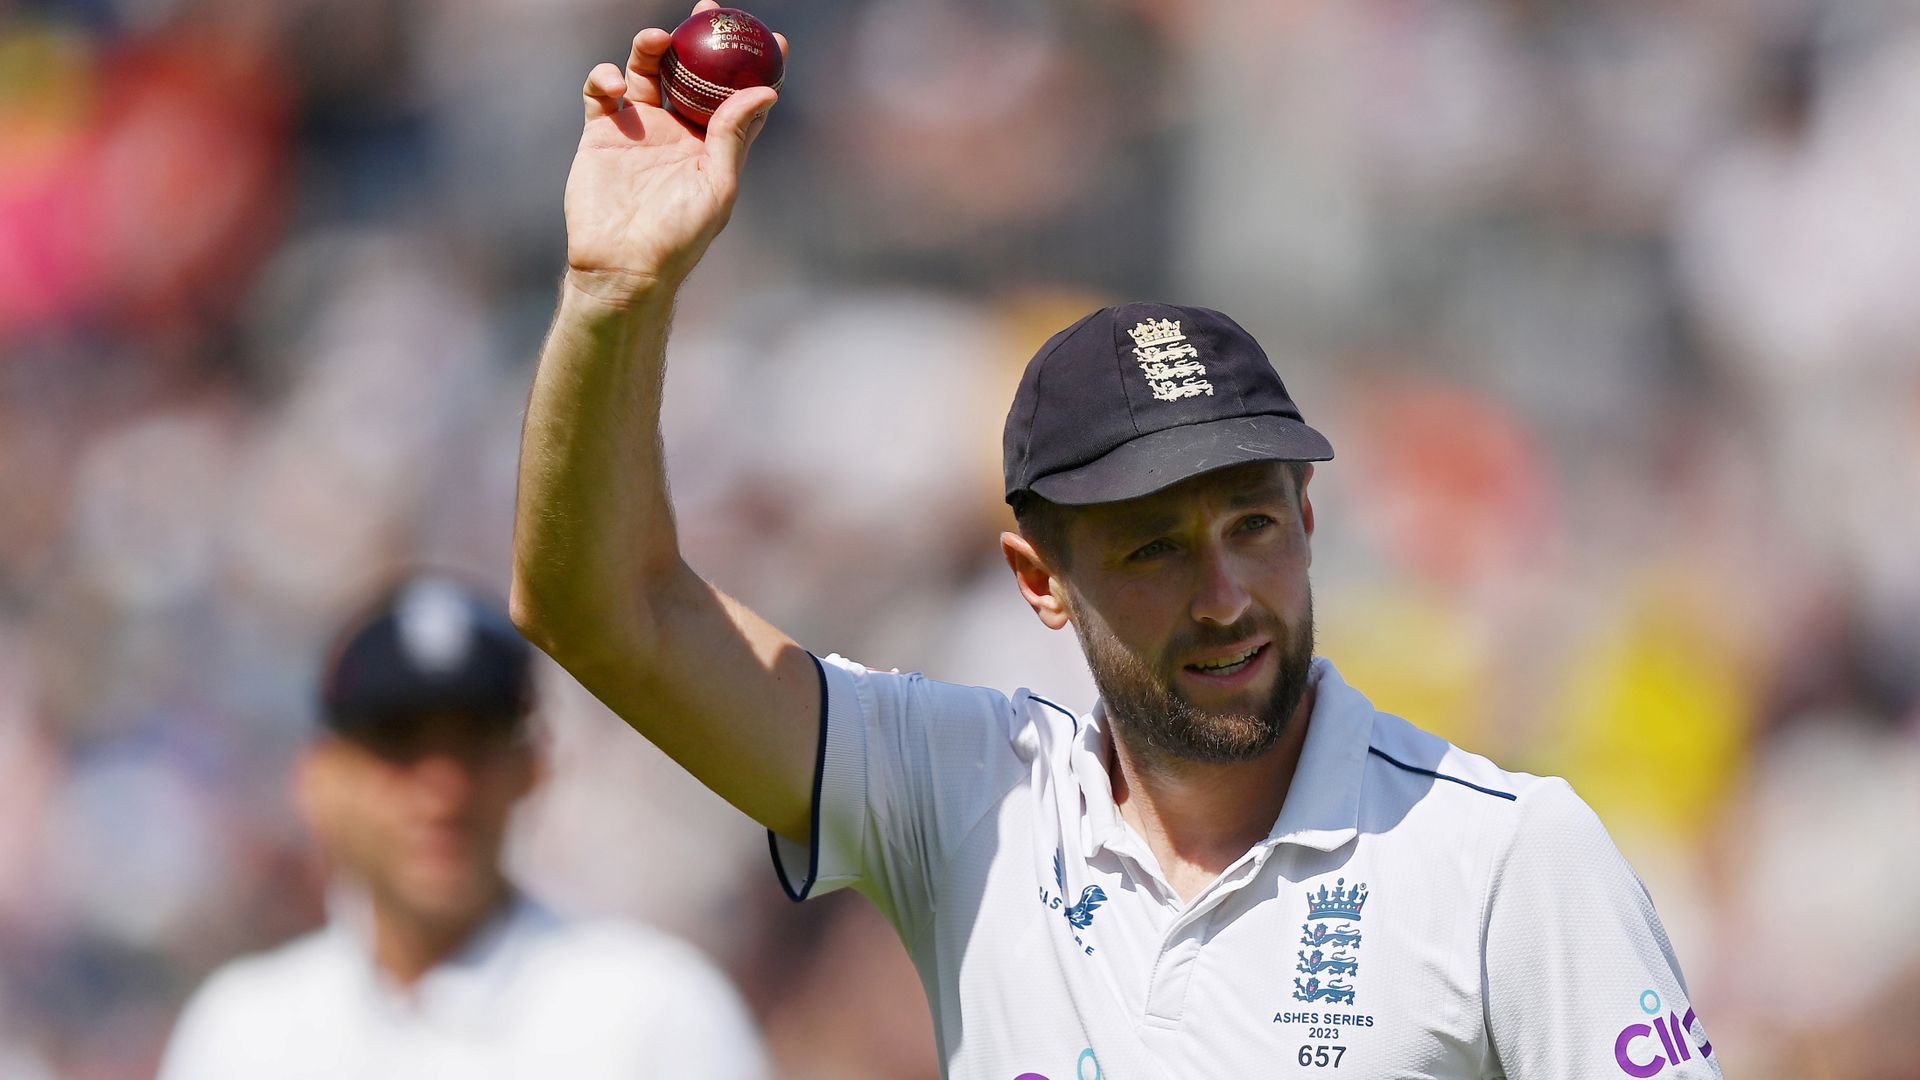 The Ashes: England reply to Austalia's 317 after Woakes takes five LIVE!